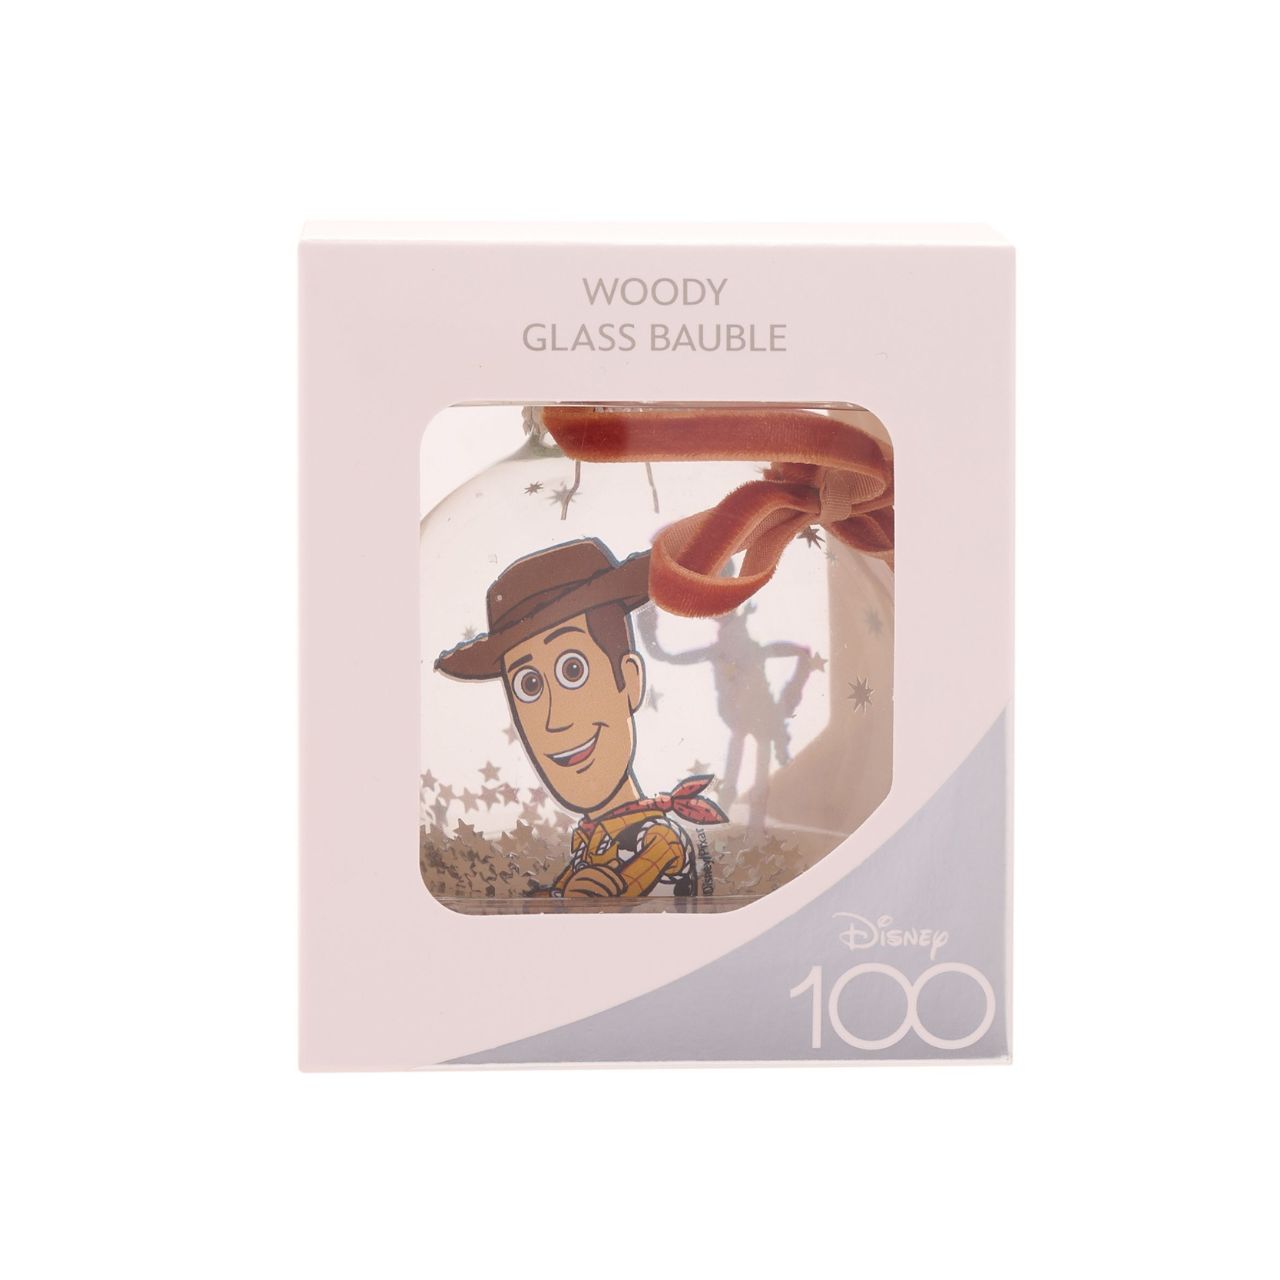 Disney 100th Anniversary Bauble - Woody  A Woody glass bauble from Disney 100 by DISNEY.  This limited edition tree decoration captures the true magic of Disney on its centenary and can be enjoyed by fans of all ages at Christmas.